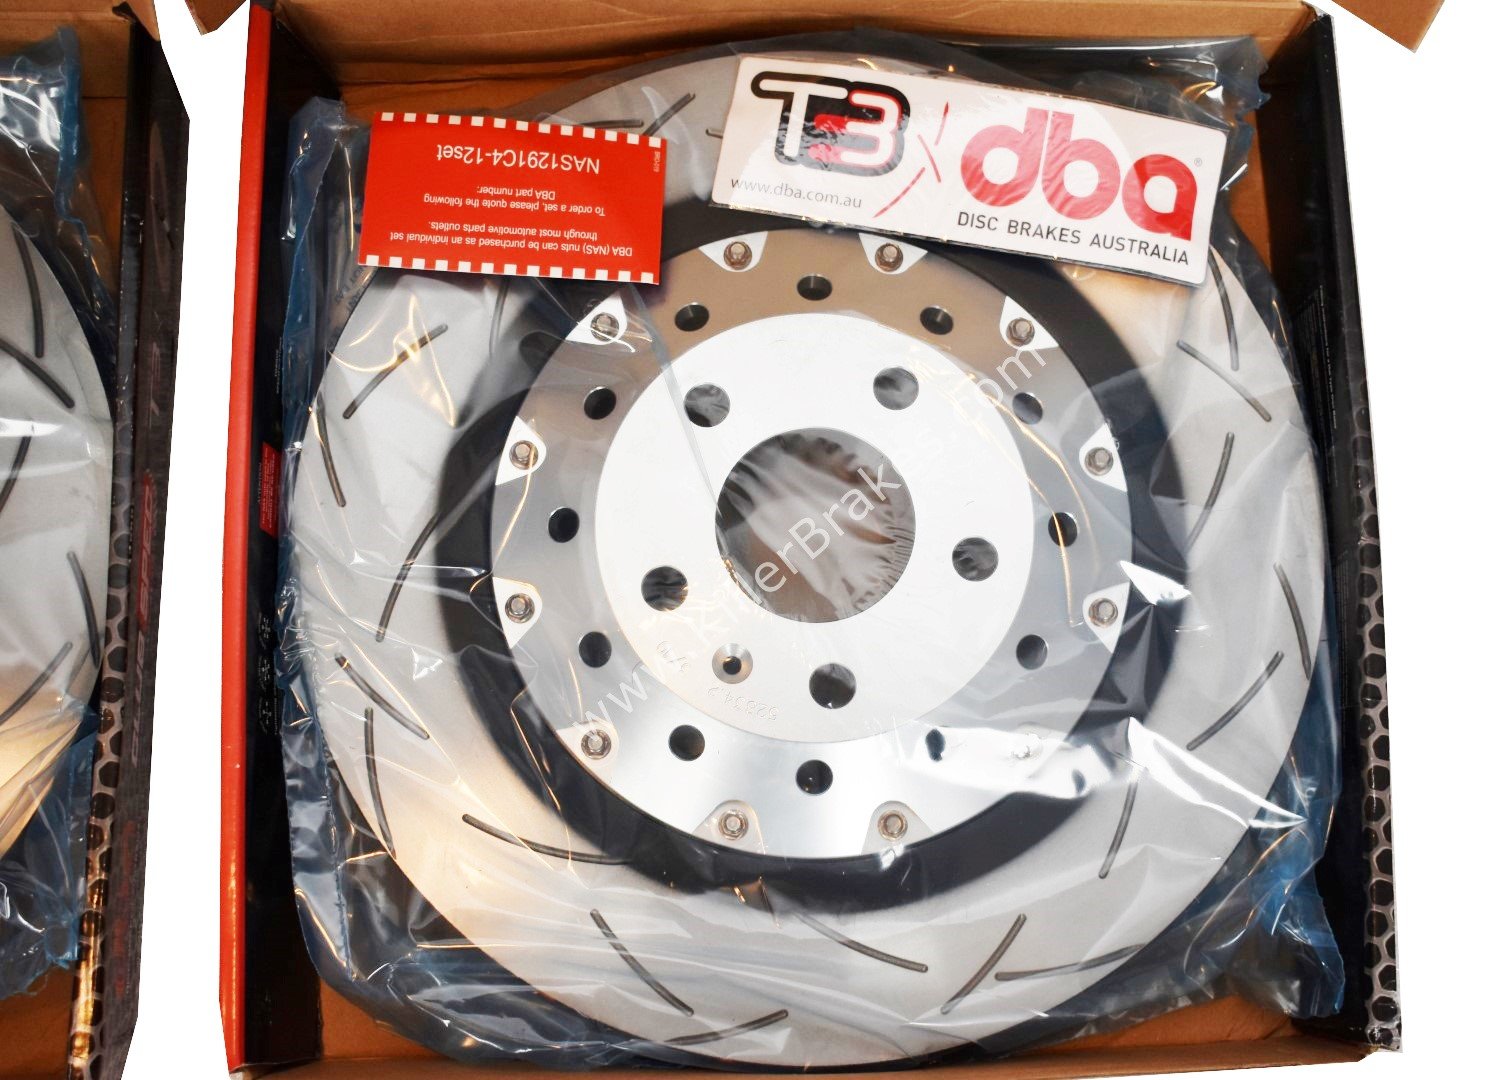 Audi-Rs4-RS5-R8-Brake-Discs-DBA-52834SLVS-365x34mm-5000-series-Fully-Assembled-2-Piece-Clear-Anodised-T3-4